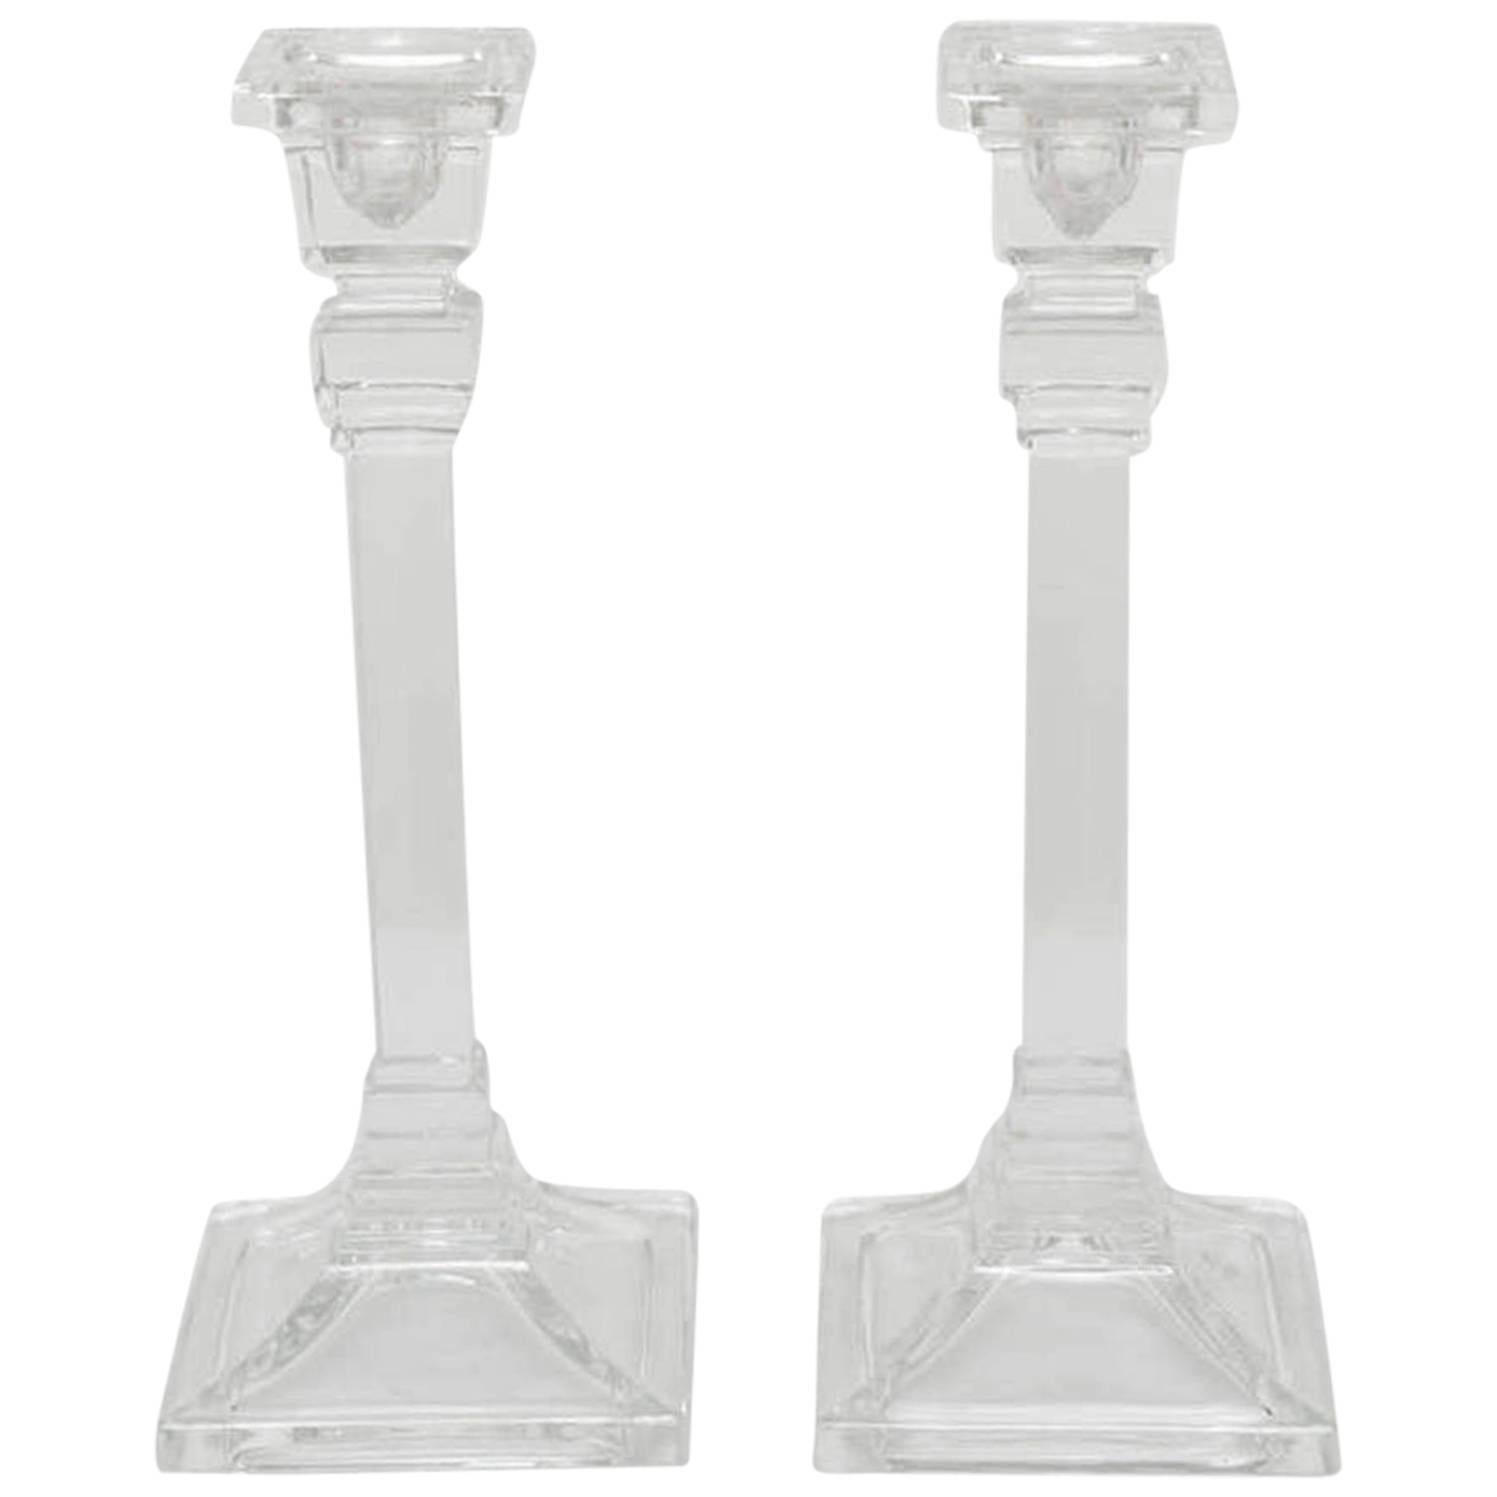 Pair of Glass Federal-Style Candlesticks